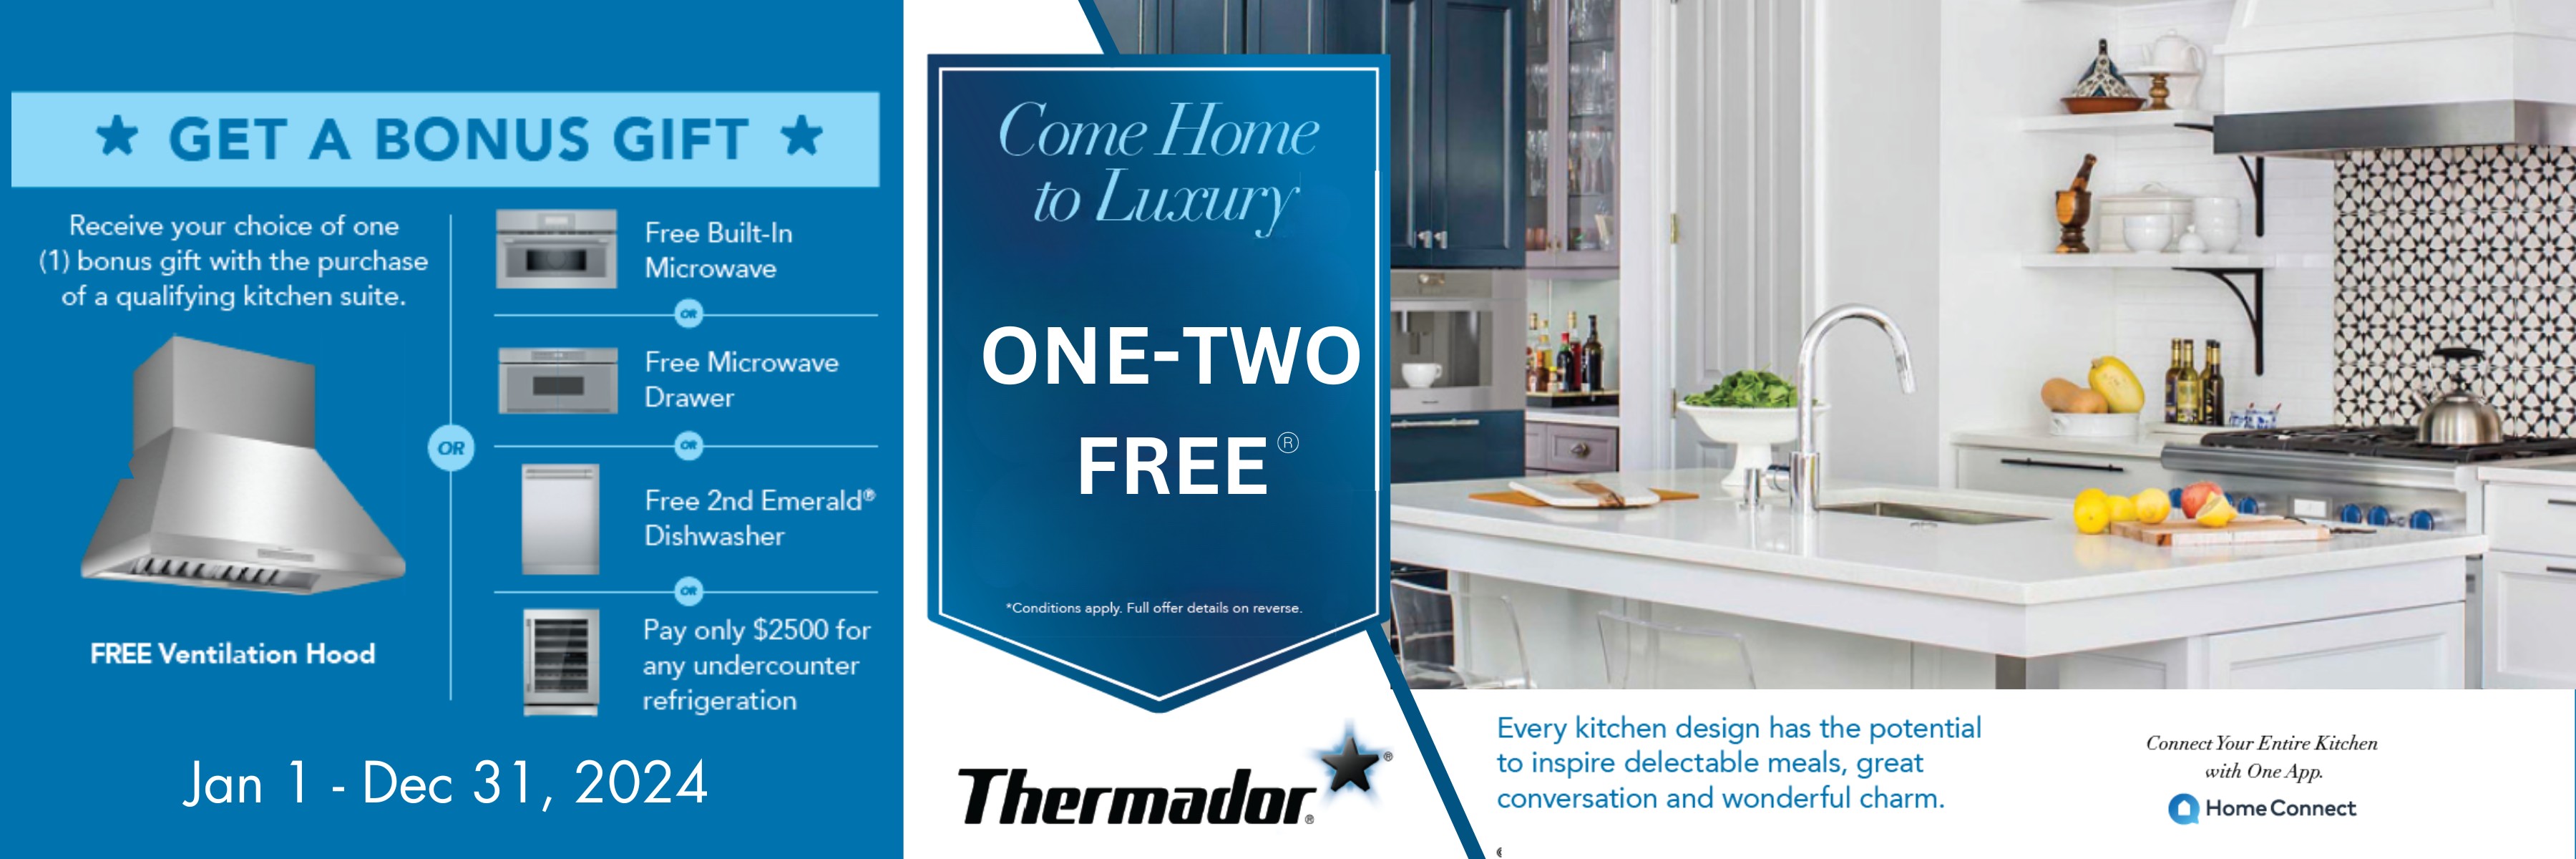 Thermador appliances promotion